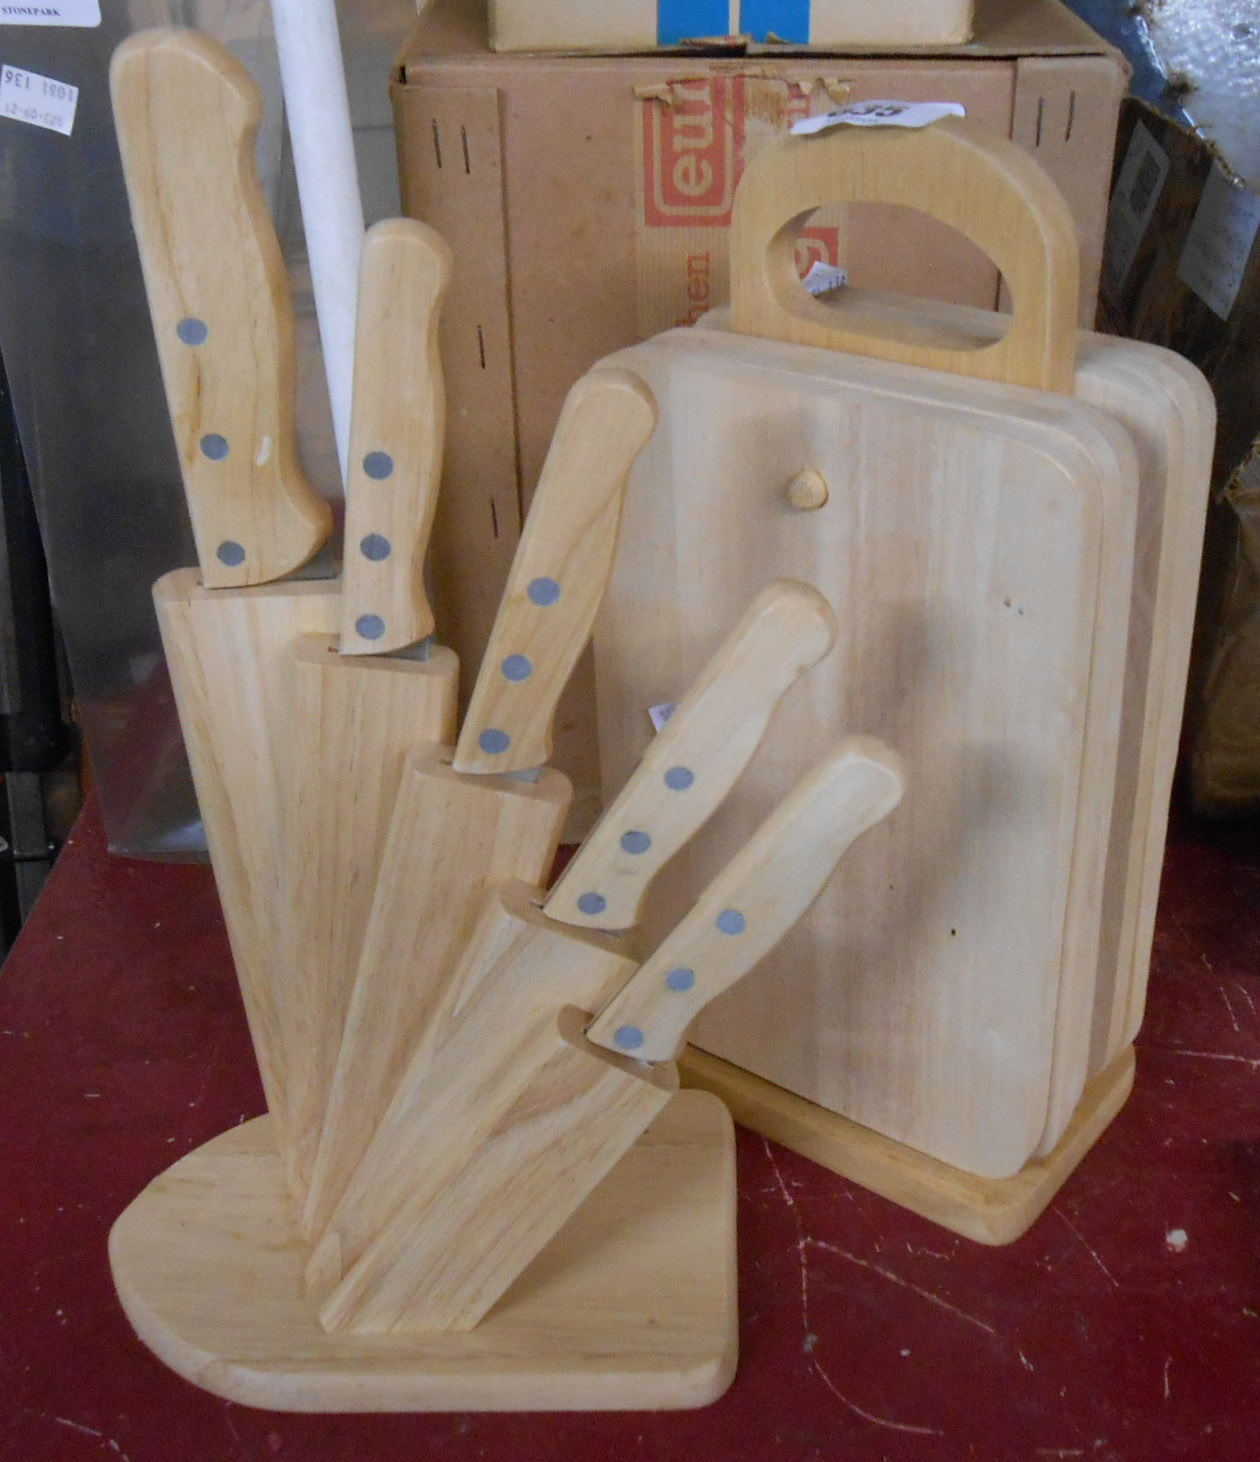 A modern pine kitchen knife block - sold with a set of wooden chopping boards and stand